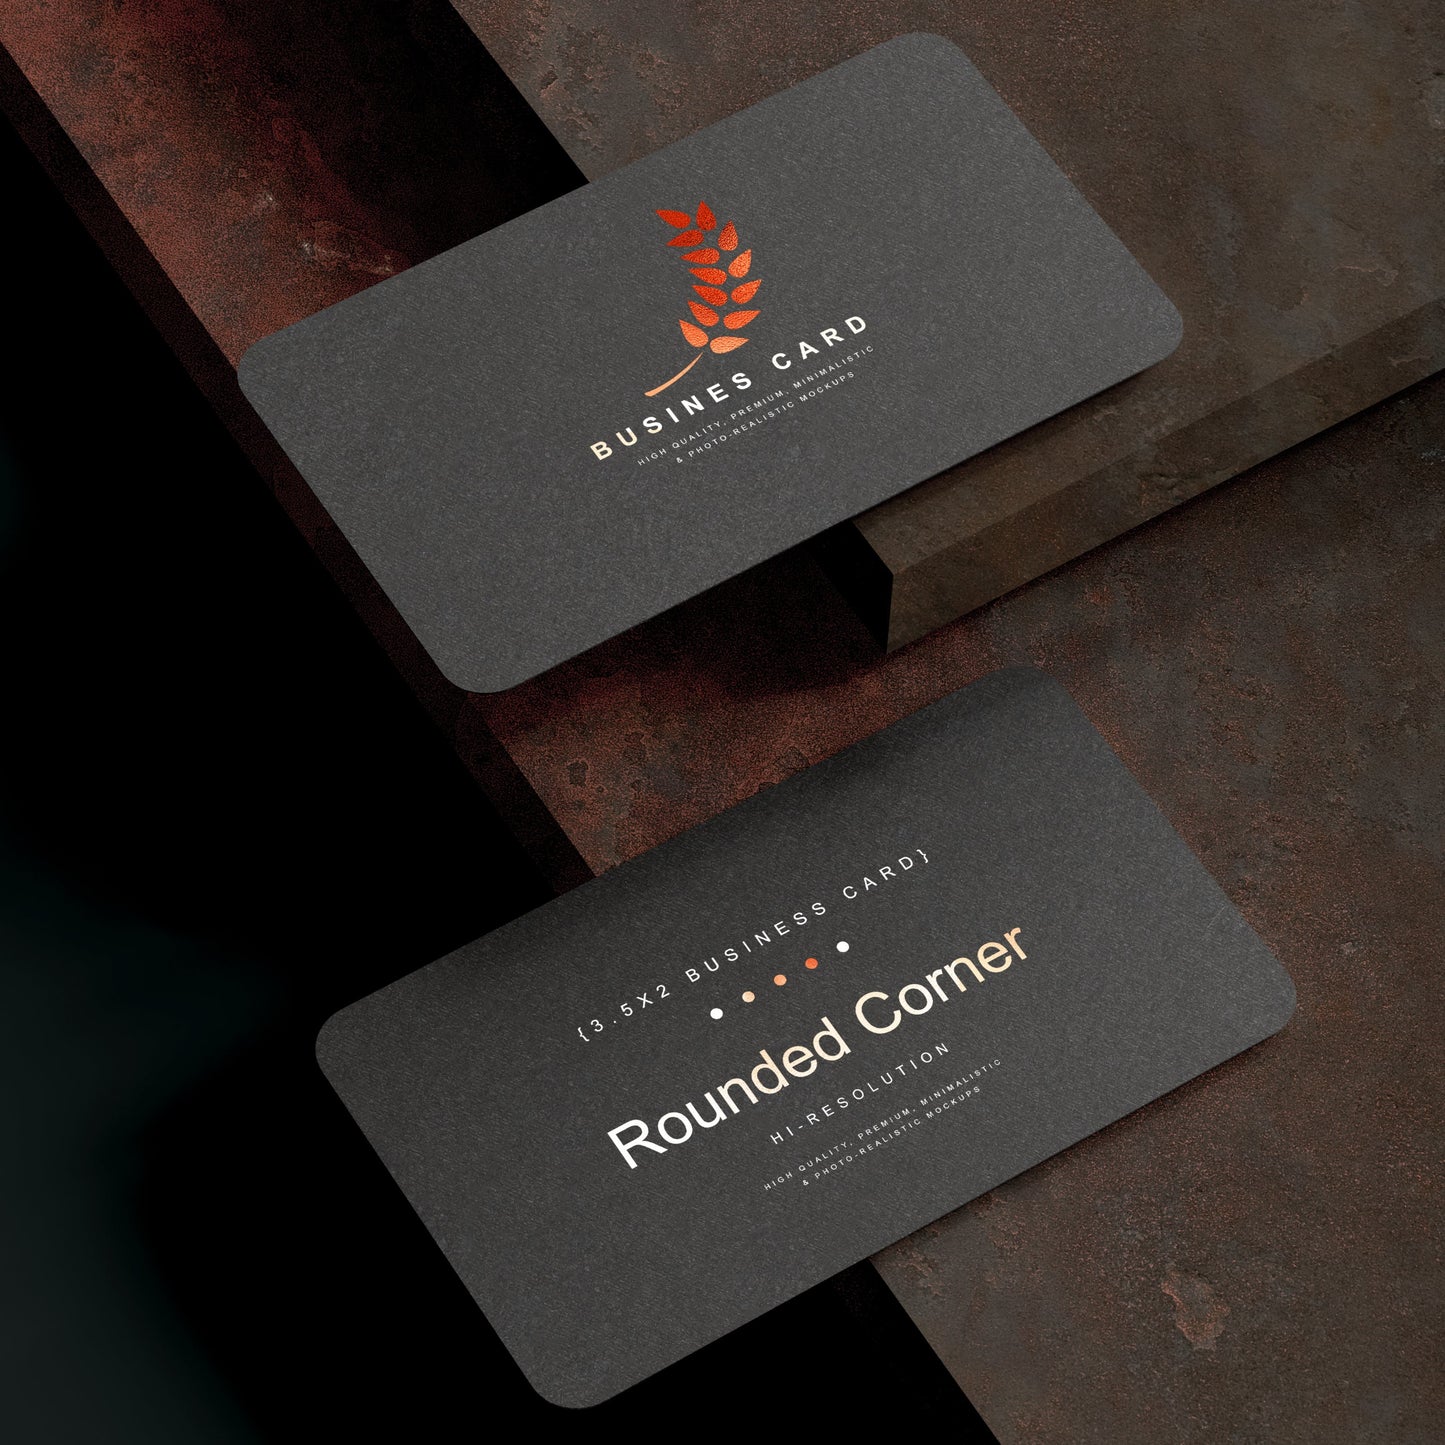 Standard Rounded Corner Matte/Dull Finish Business Cards